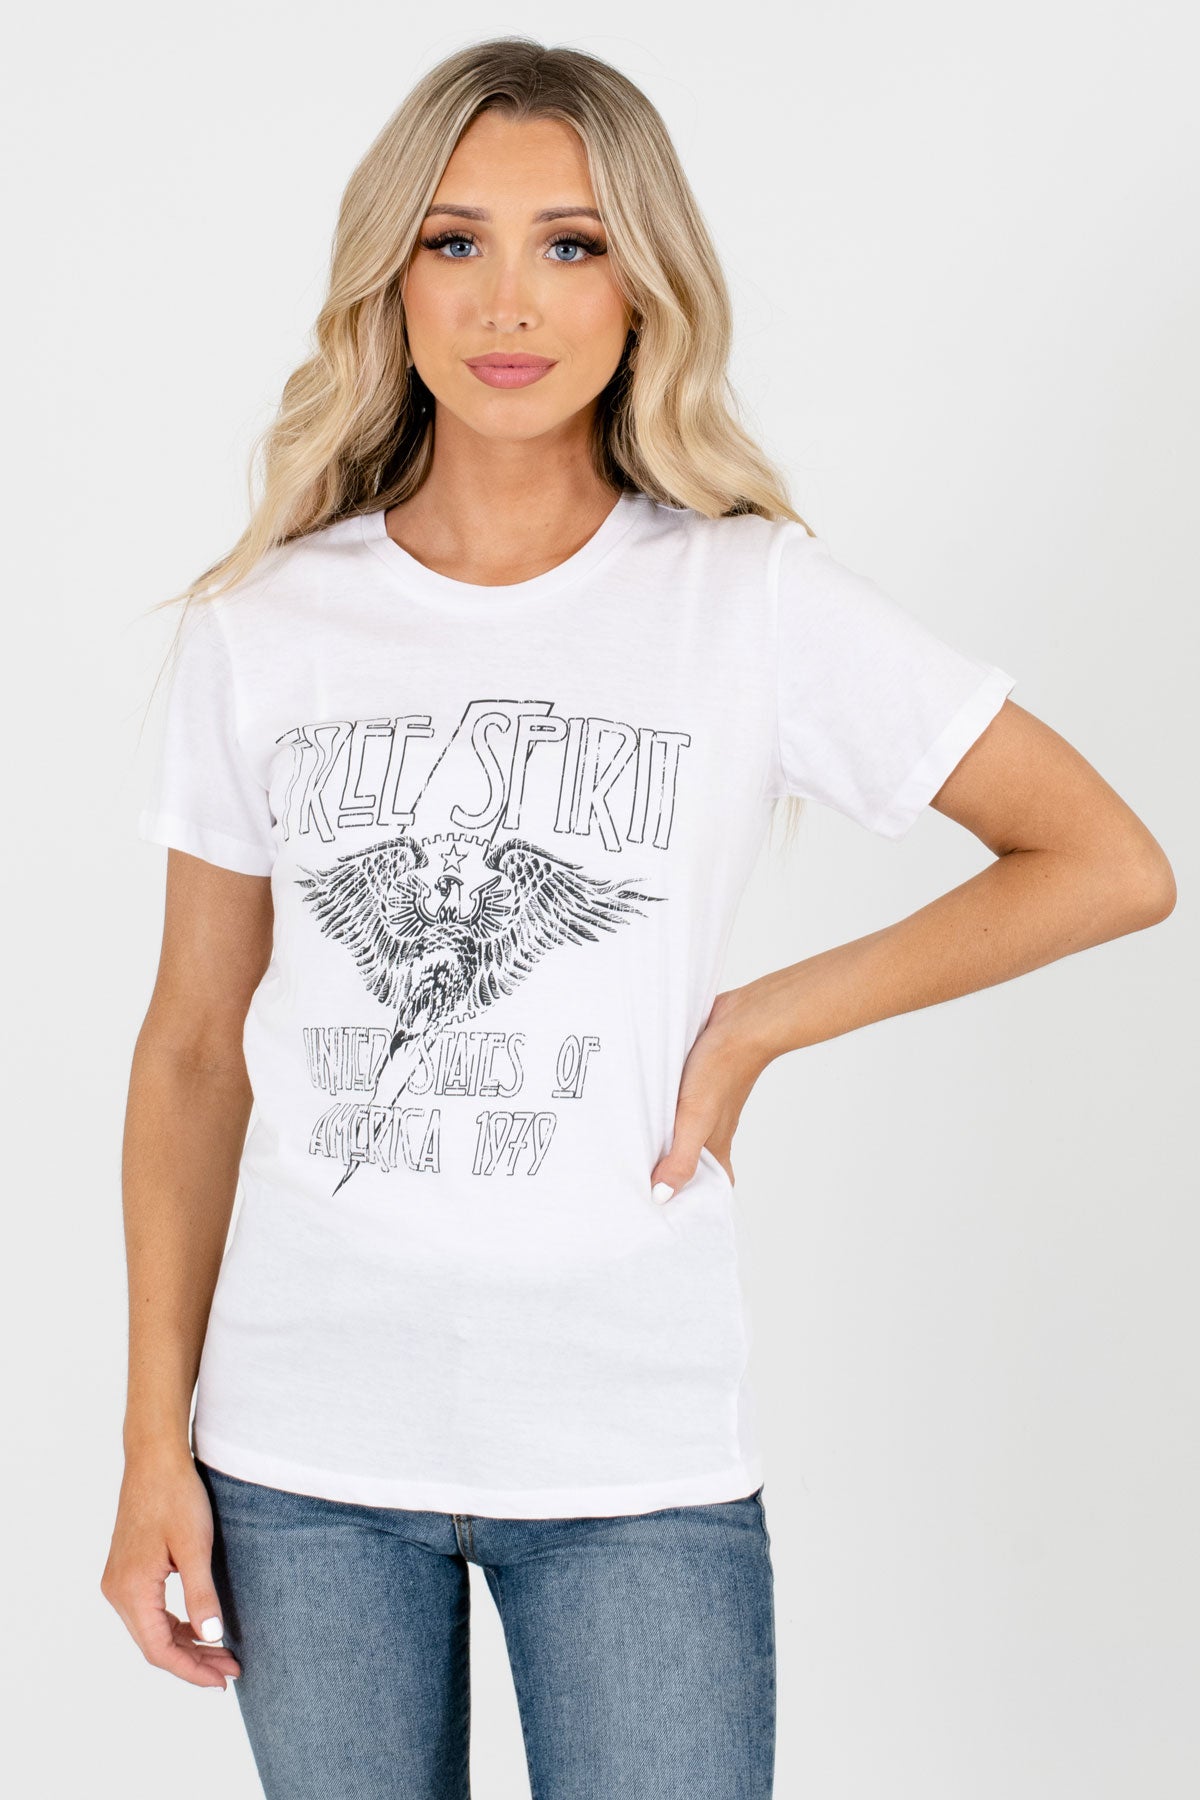 Free Spirit Graphic Tee  Boutique Graphic T-Shirts for Women